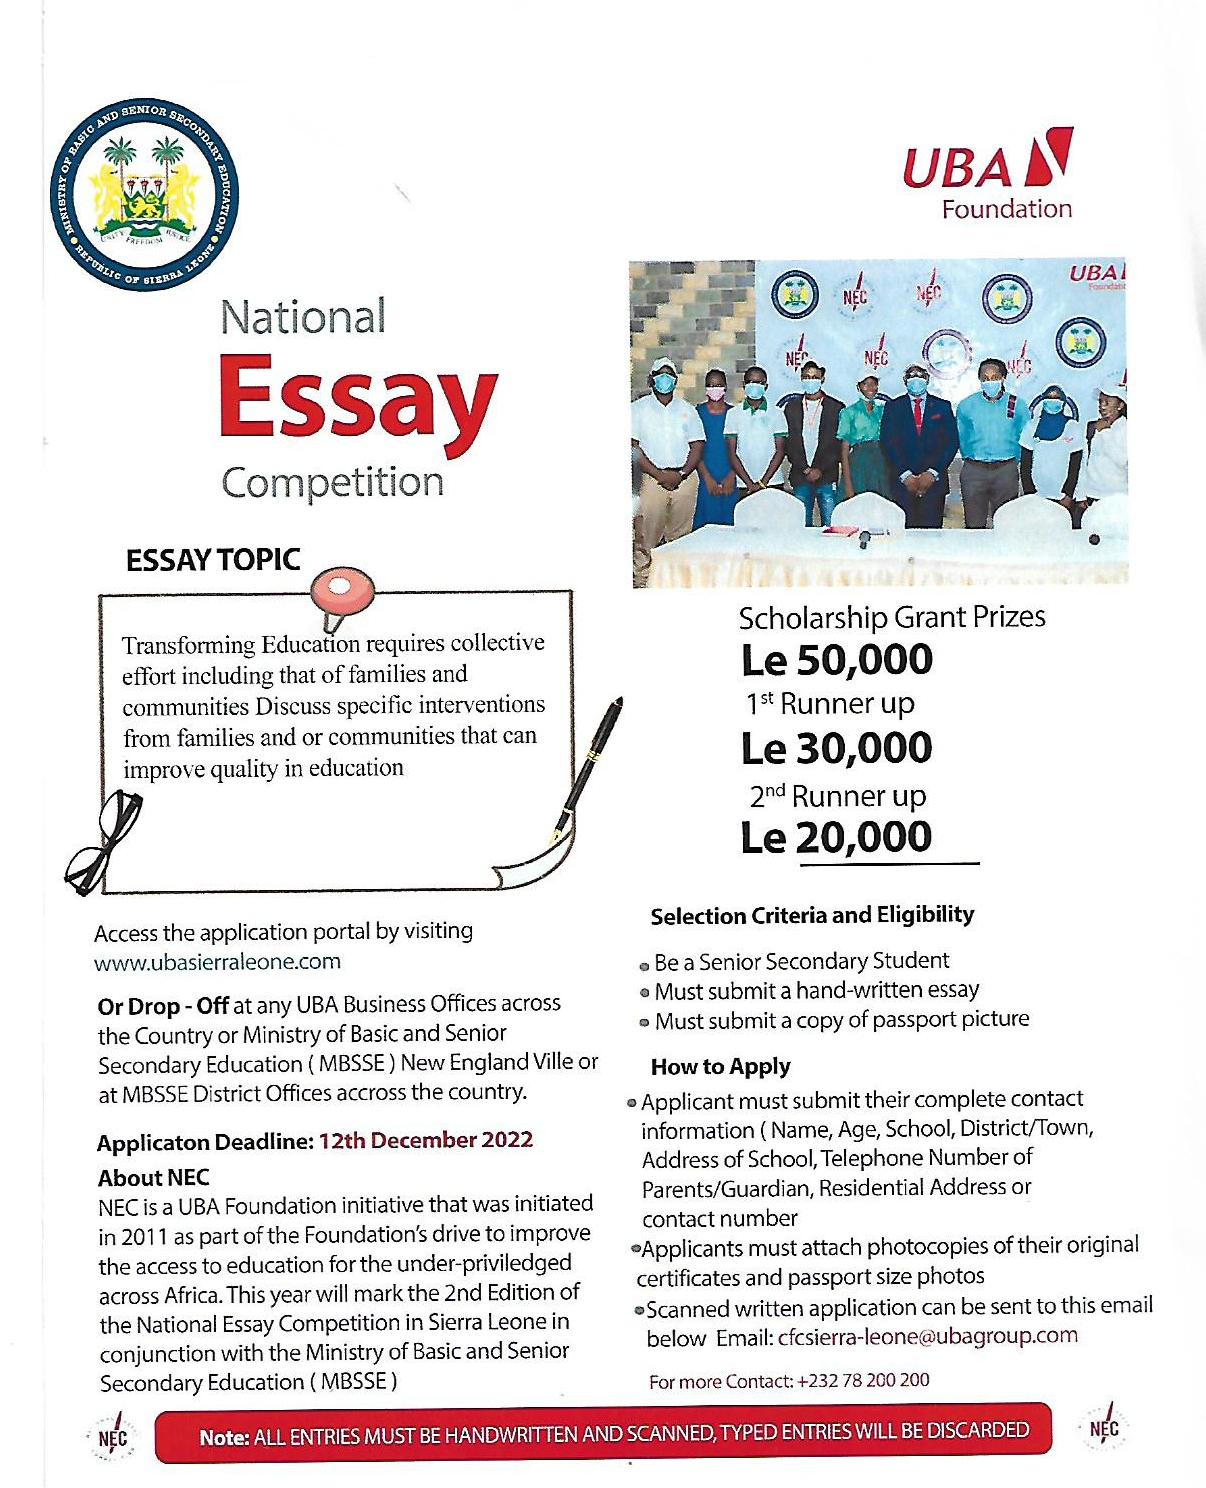 what is the topic for uba essay competition 2023